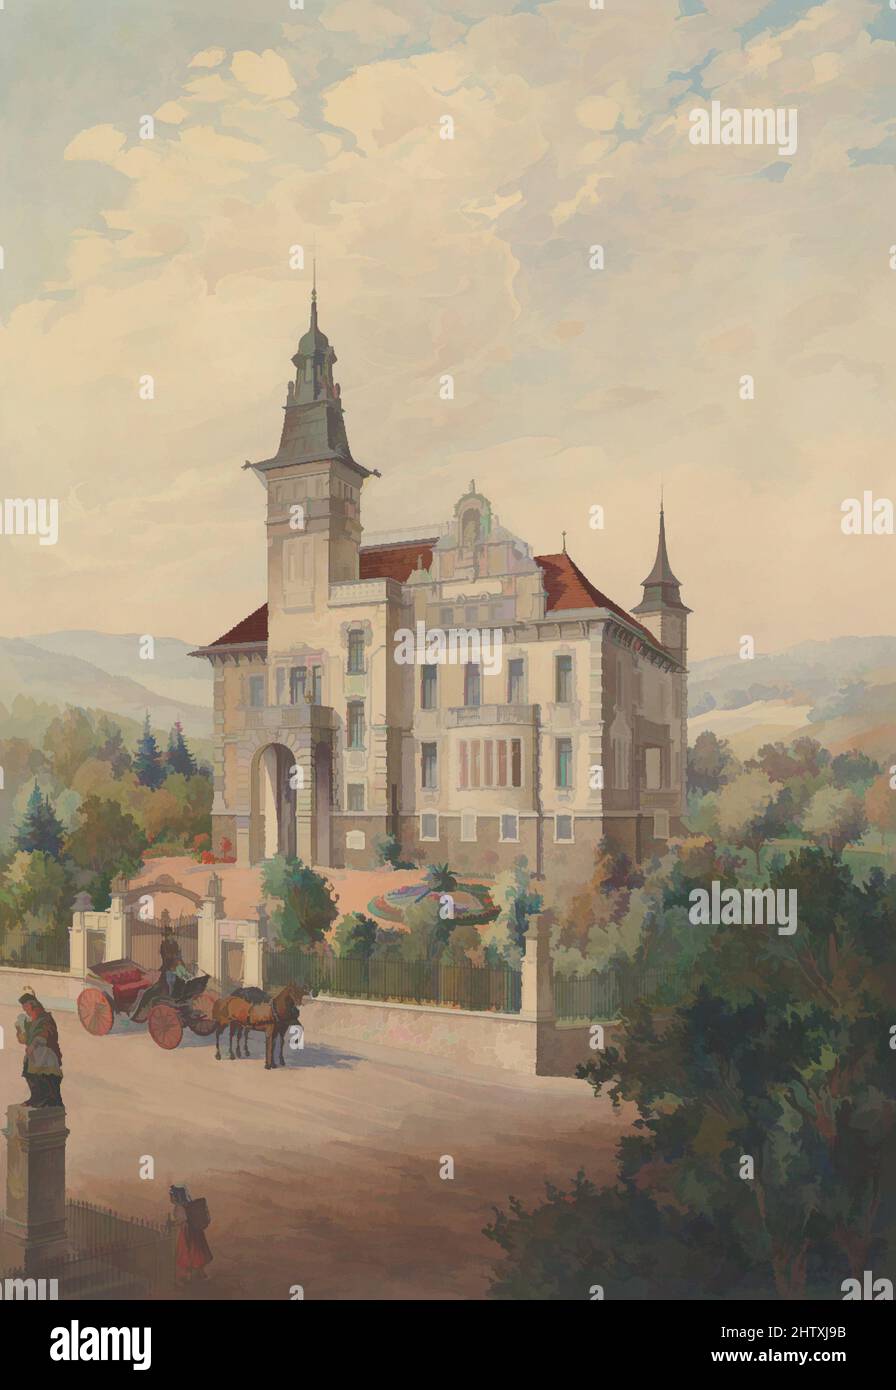 Art inspired by View of a Swiss Villa, 1896, Pen and ink with watercolor over graphite. Framing line in graphite., sheet: 23 1/8 x 16 15/16 in. (58.7 x 43 cm), Drawings, Rudolf von Alt (Austrian, Vienna 1812–1905 Vienna, Classic works modernized by Artotop with a splash of modernity. Shapes, color and value, eye-catching visual impact on art. Emotions through freedom of artworks in a contemporary way. A timeless message pursuing a wildly creative new direction. Artists turning to the digital medium and creating the Artotop NFT Stock Photo